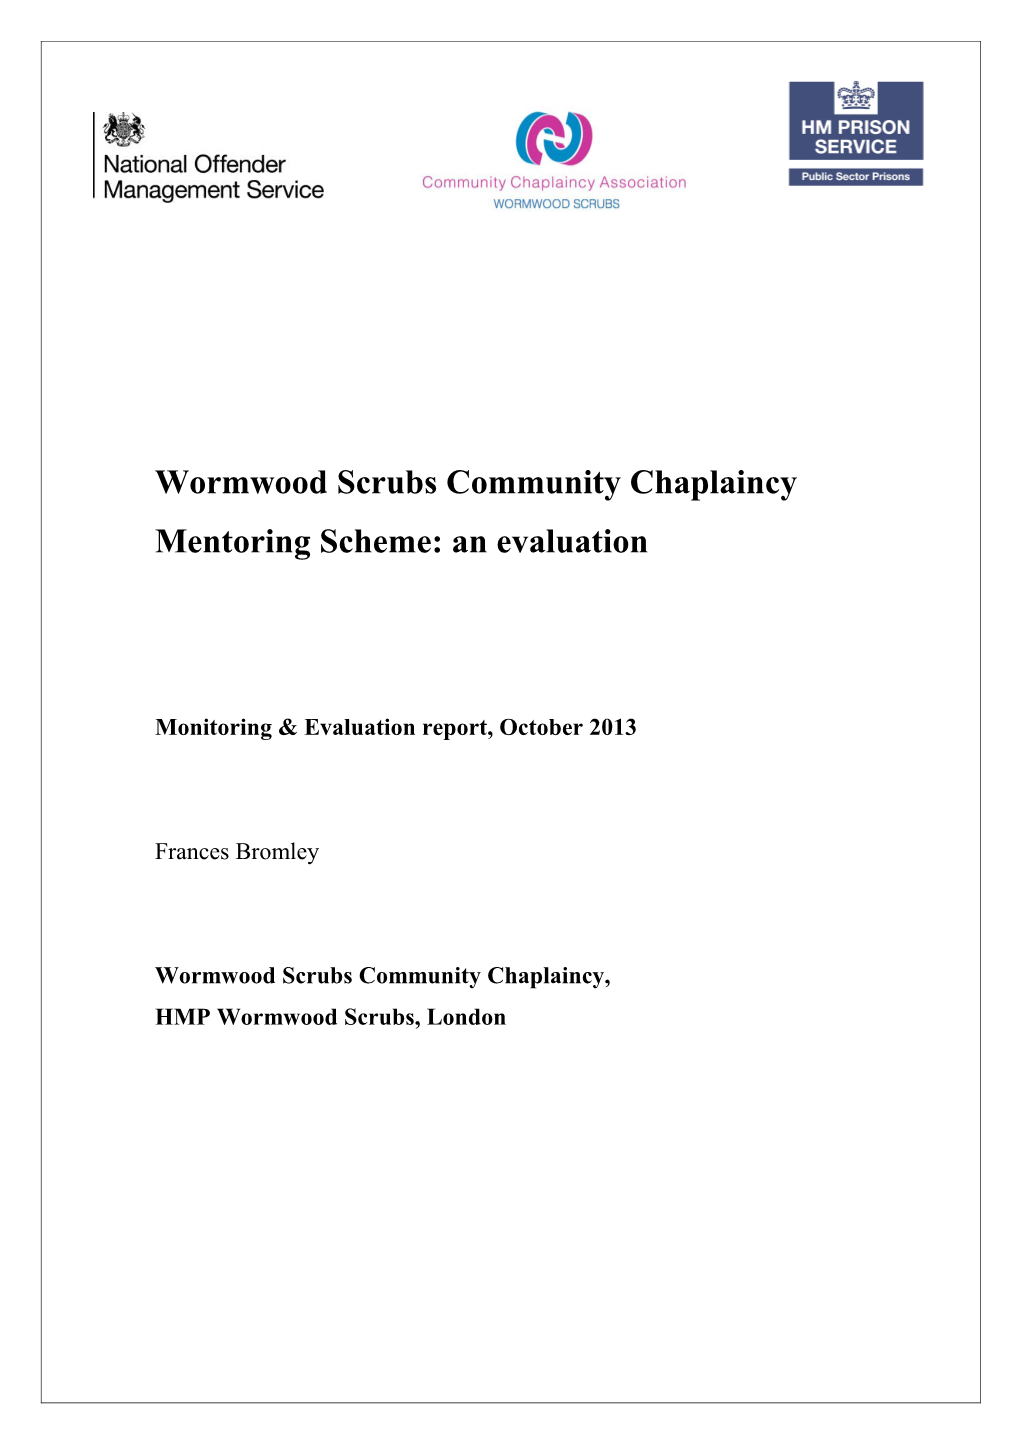 Mentoring & Befriending Monitoring and Evaluation Report